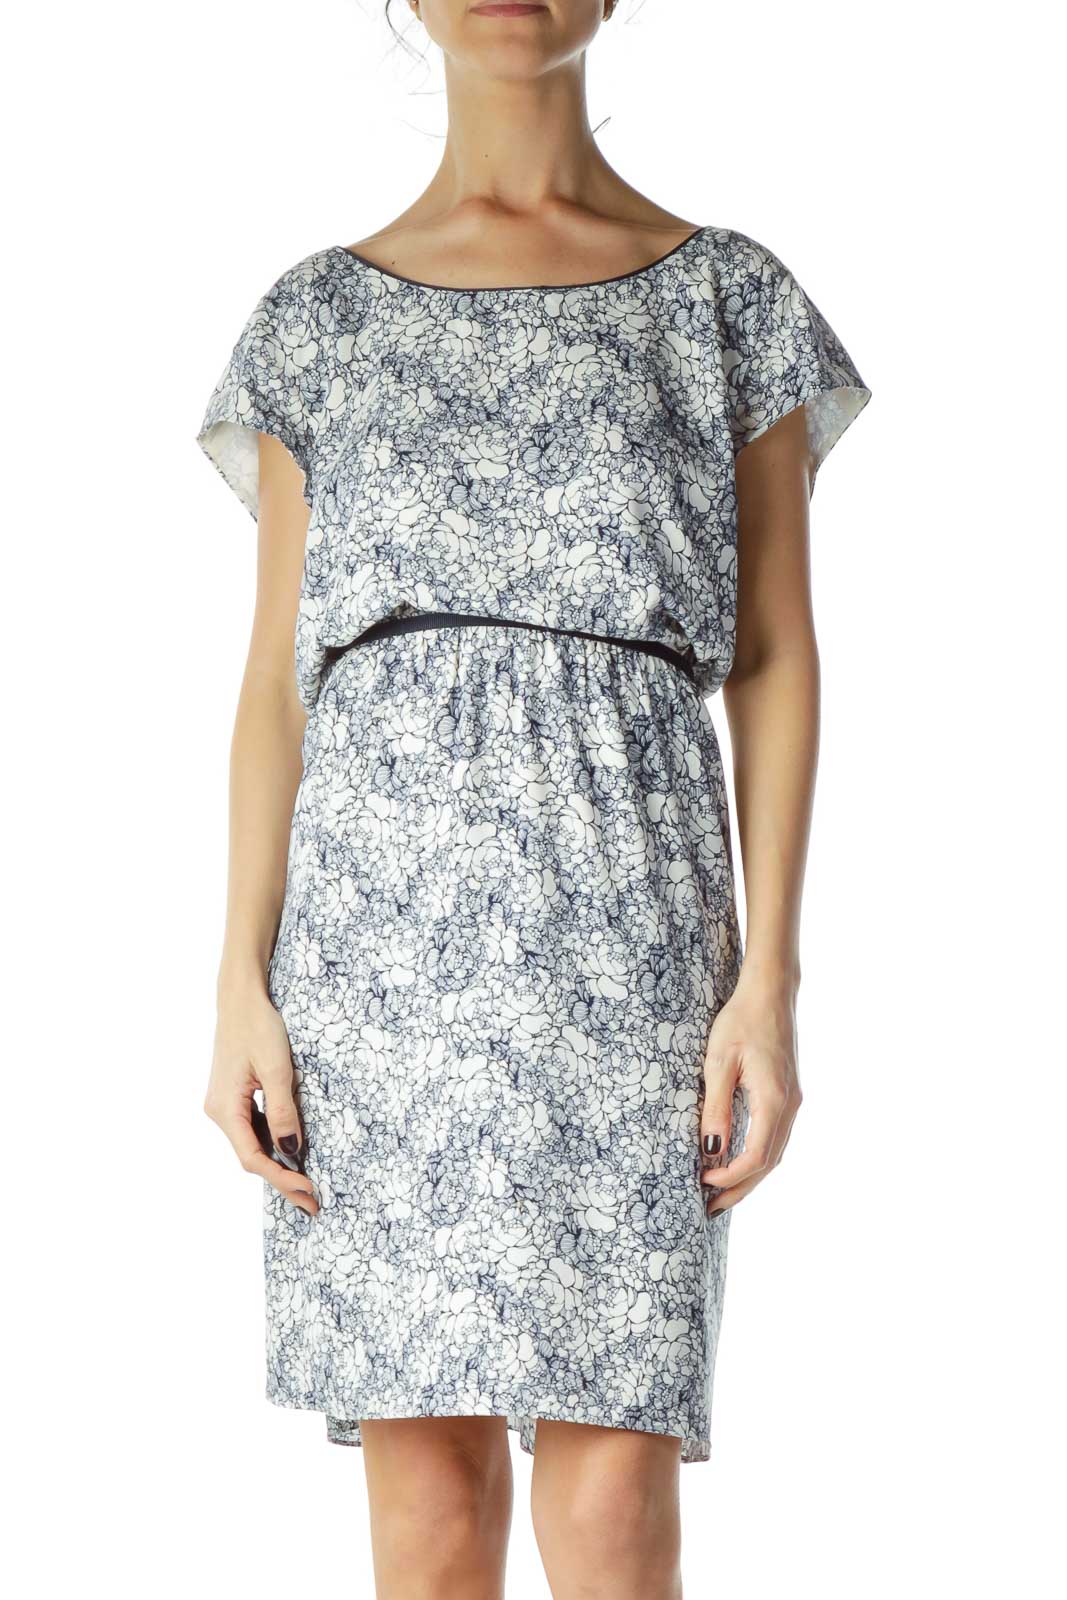 Blue White Floral Work Dress Front